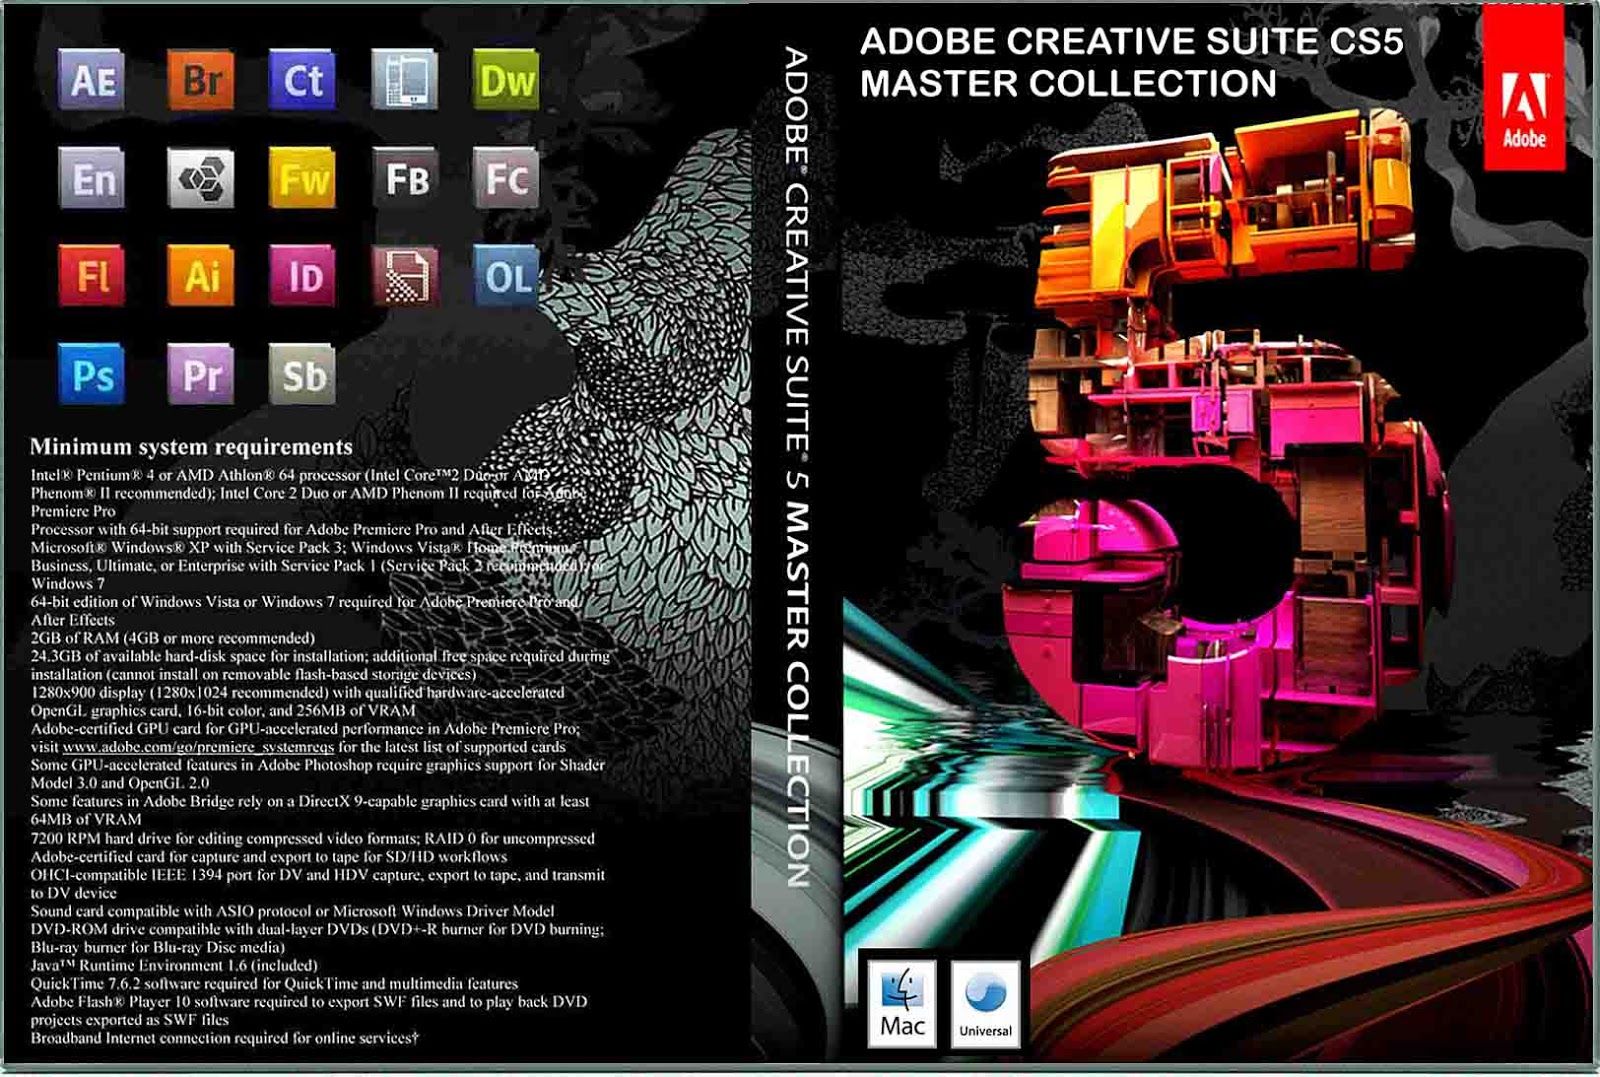 Adobe cs5 master collection system requirements